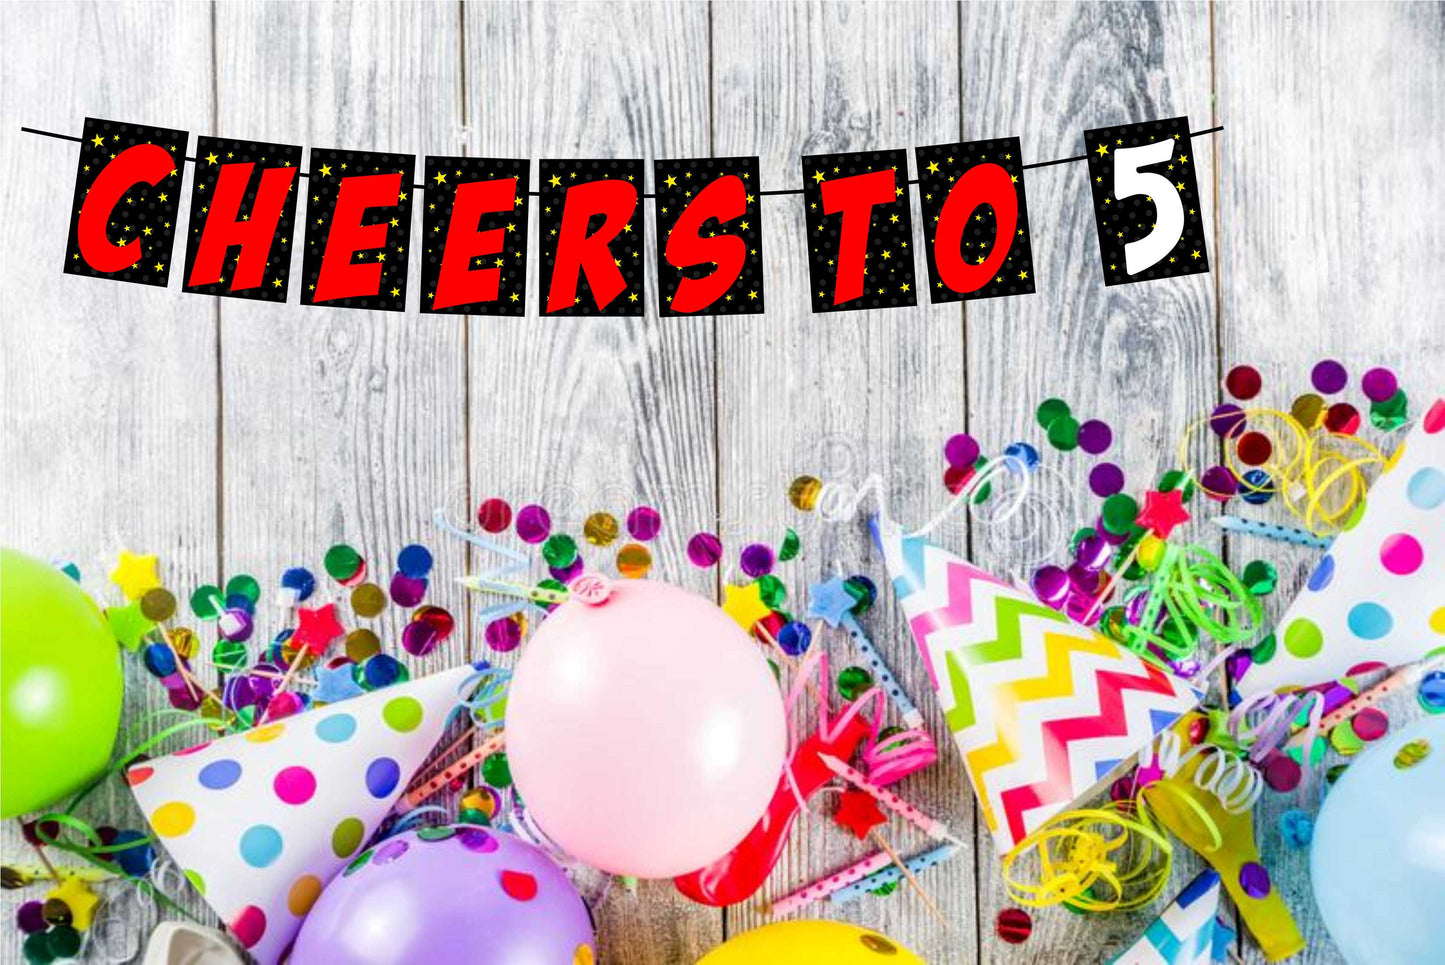 Cheers to 5 Fifth Birthday Banner for Photo Shoot Backdrop and Theme Party